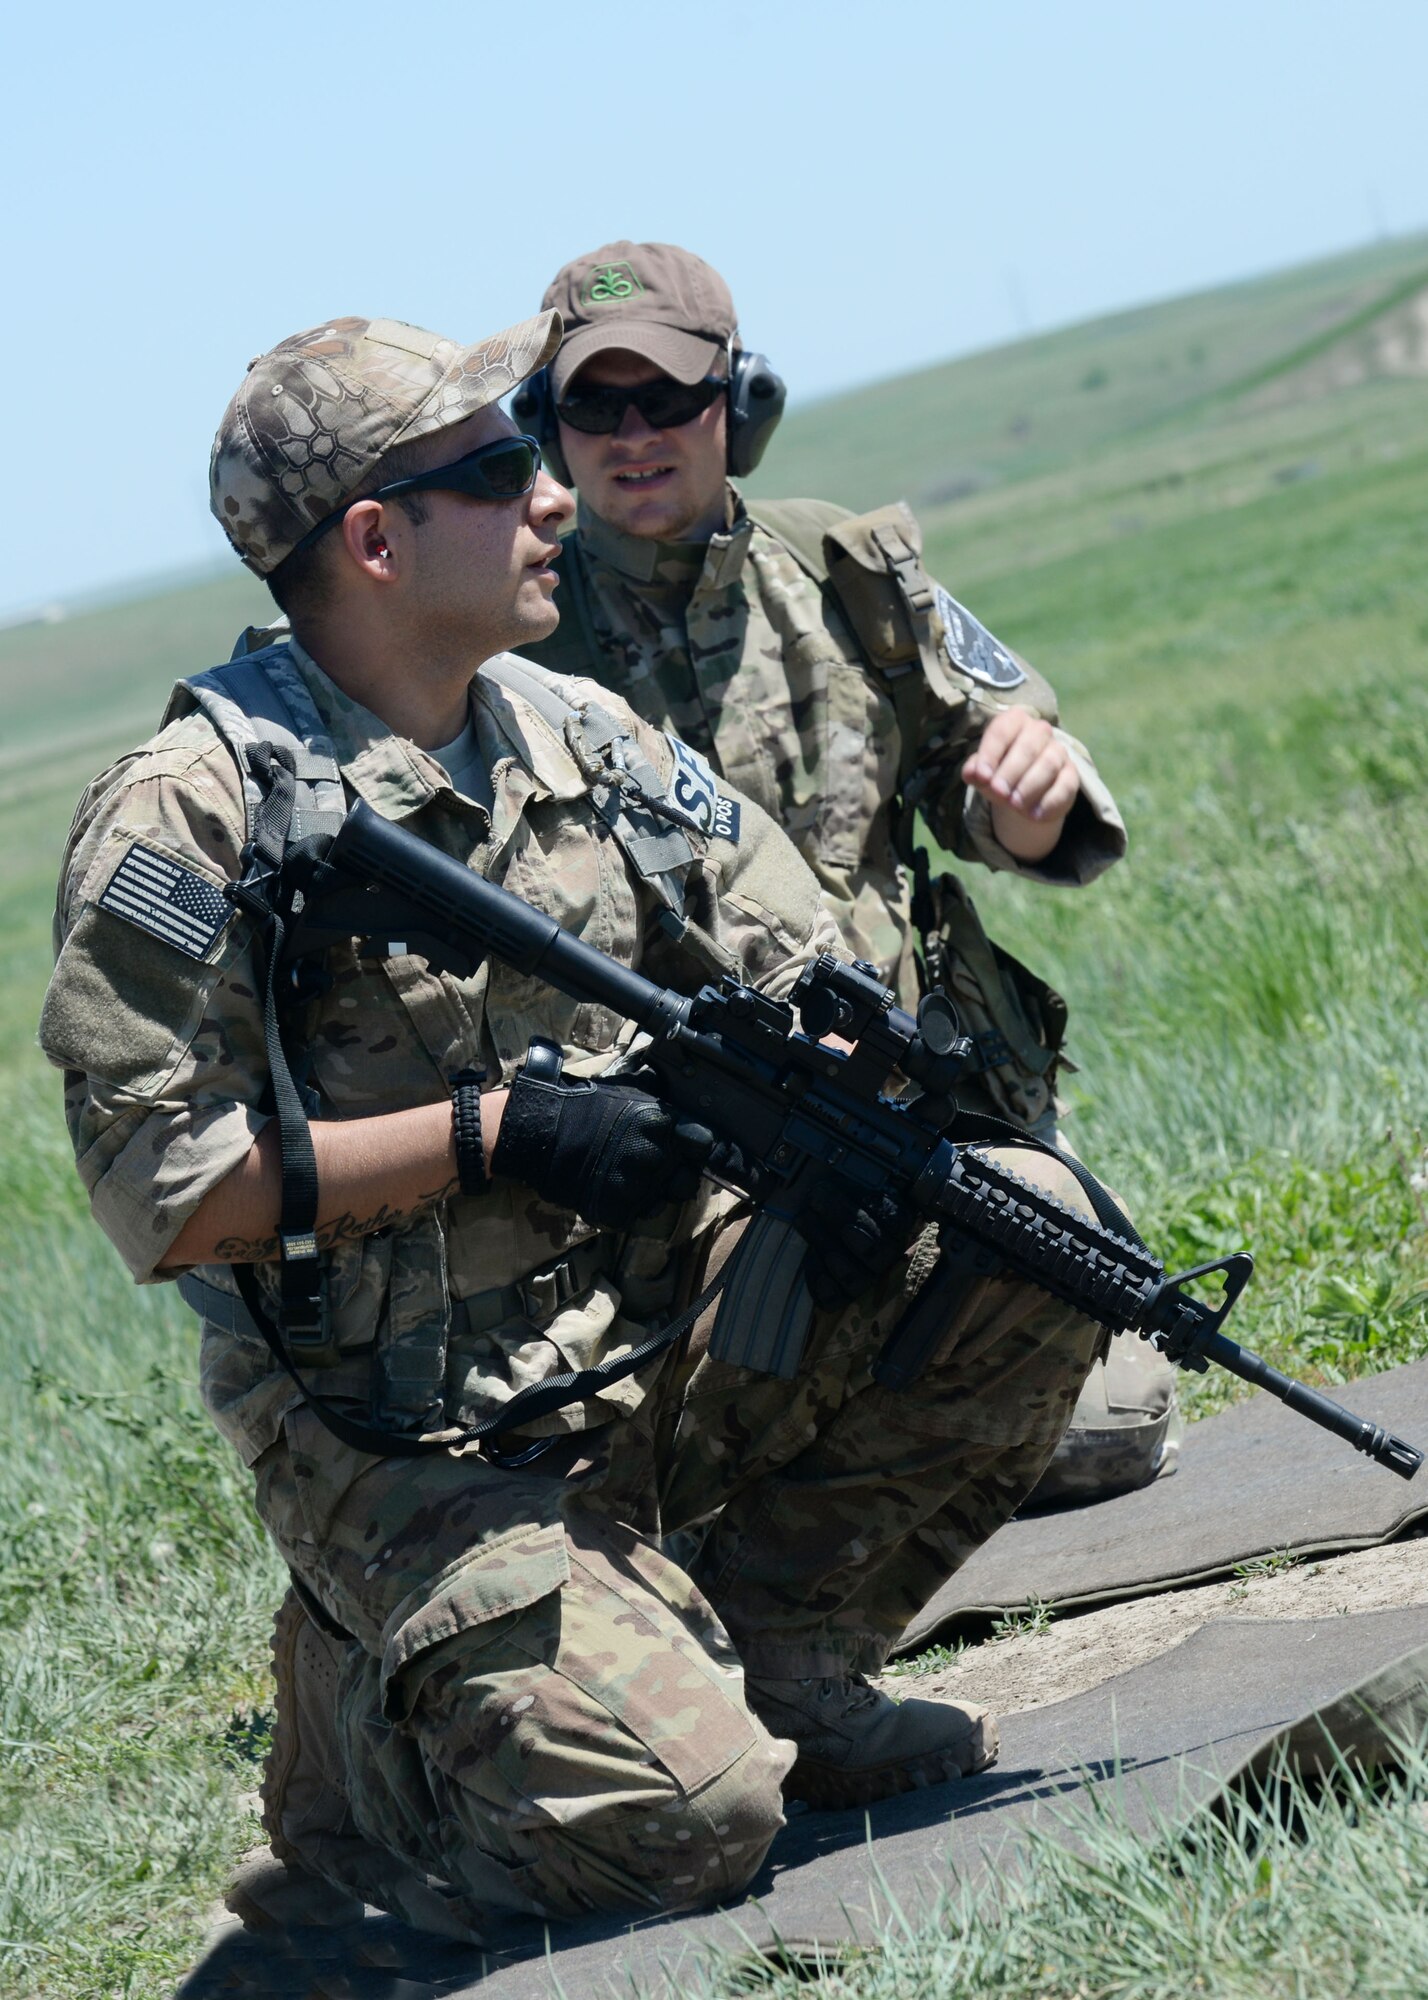 Staff Sgt. Edgar Cerrillo (left), 28th Security Forces Squadron unit orientation training instructor, works with Casey Kenrick, Pennington County sheriff investigator and a Rapid City/PC special response team member, during a training day at an outdoor shooting range in Rapid City, S.D., May 29, 2014. Training consisted of three elements; night vision familiarization, an obstacle course, and a qualification course. (U.S. Air Force photo by Airman 1st Class Rebecca Imwalle/ Released)